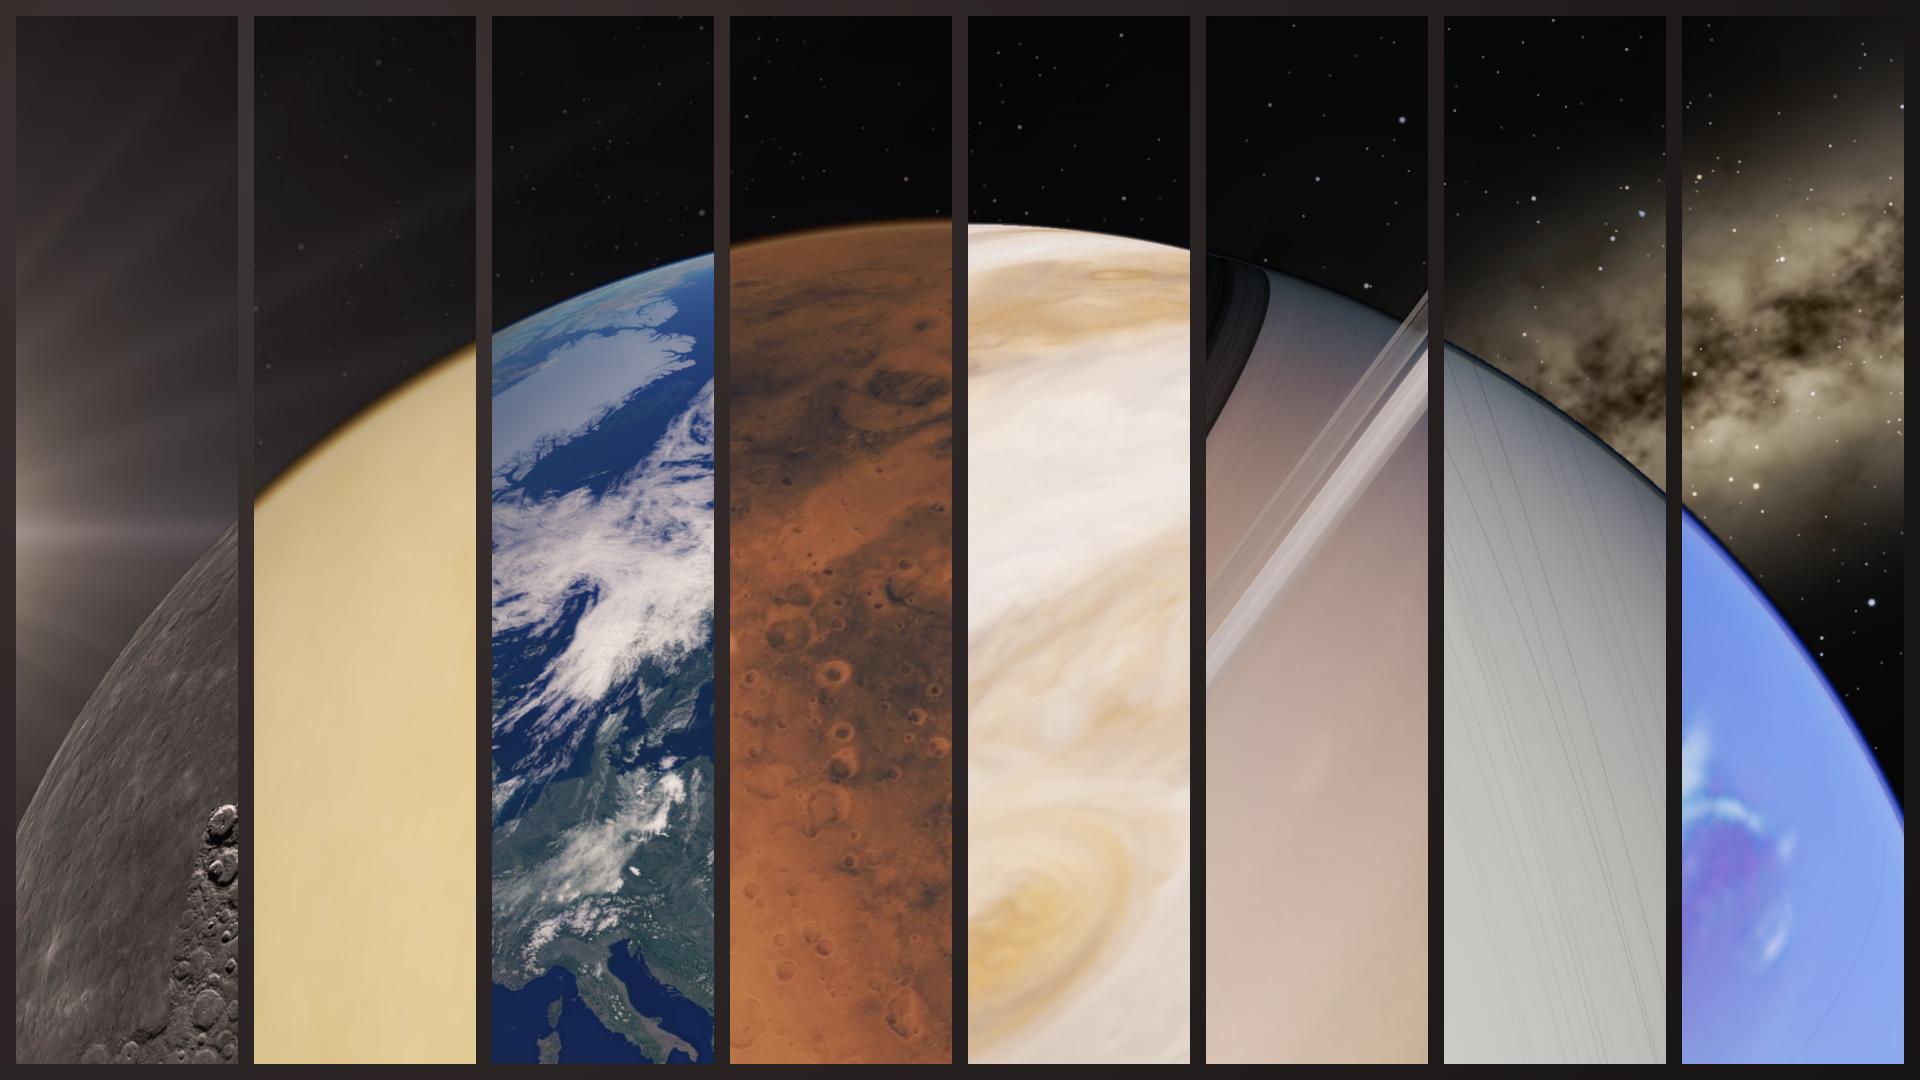 Sci Fi Solar System HD Wallpaper | Background Image